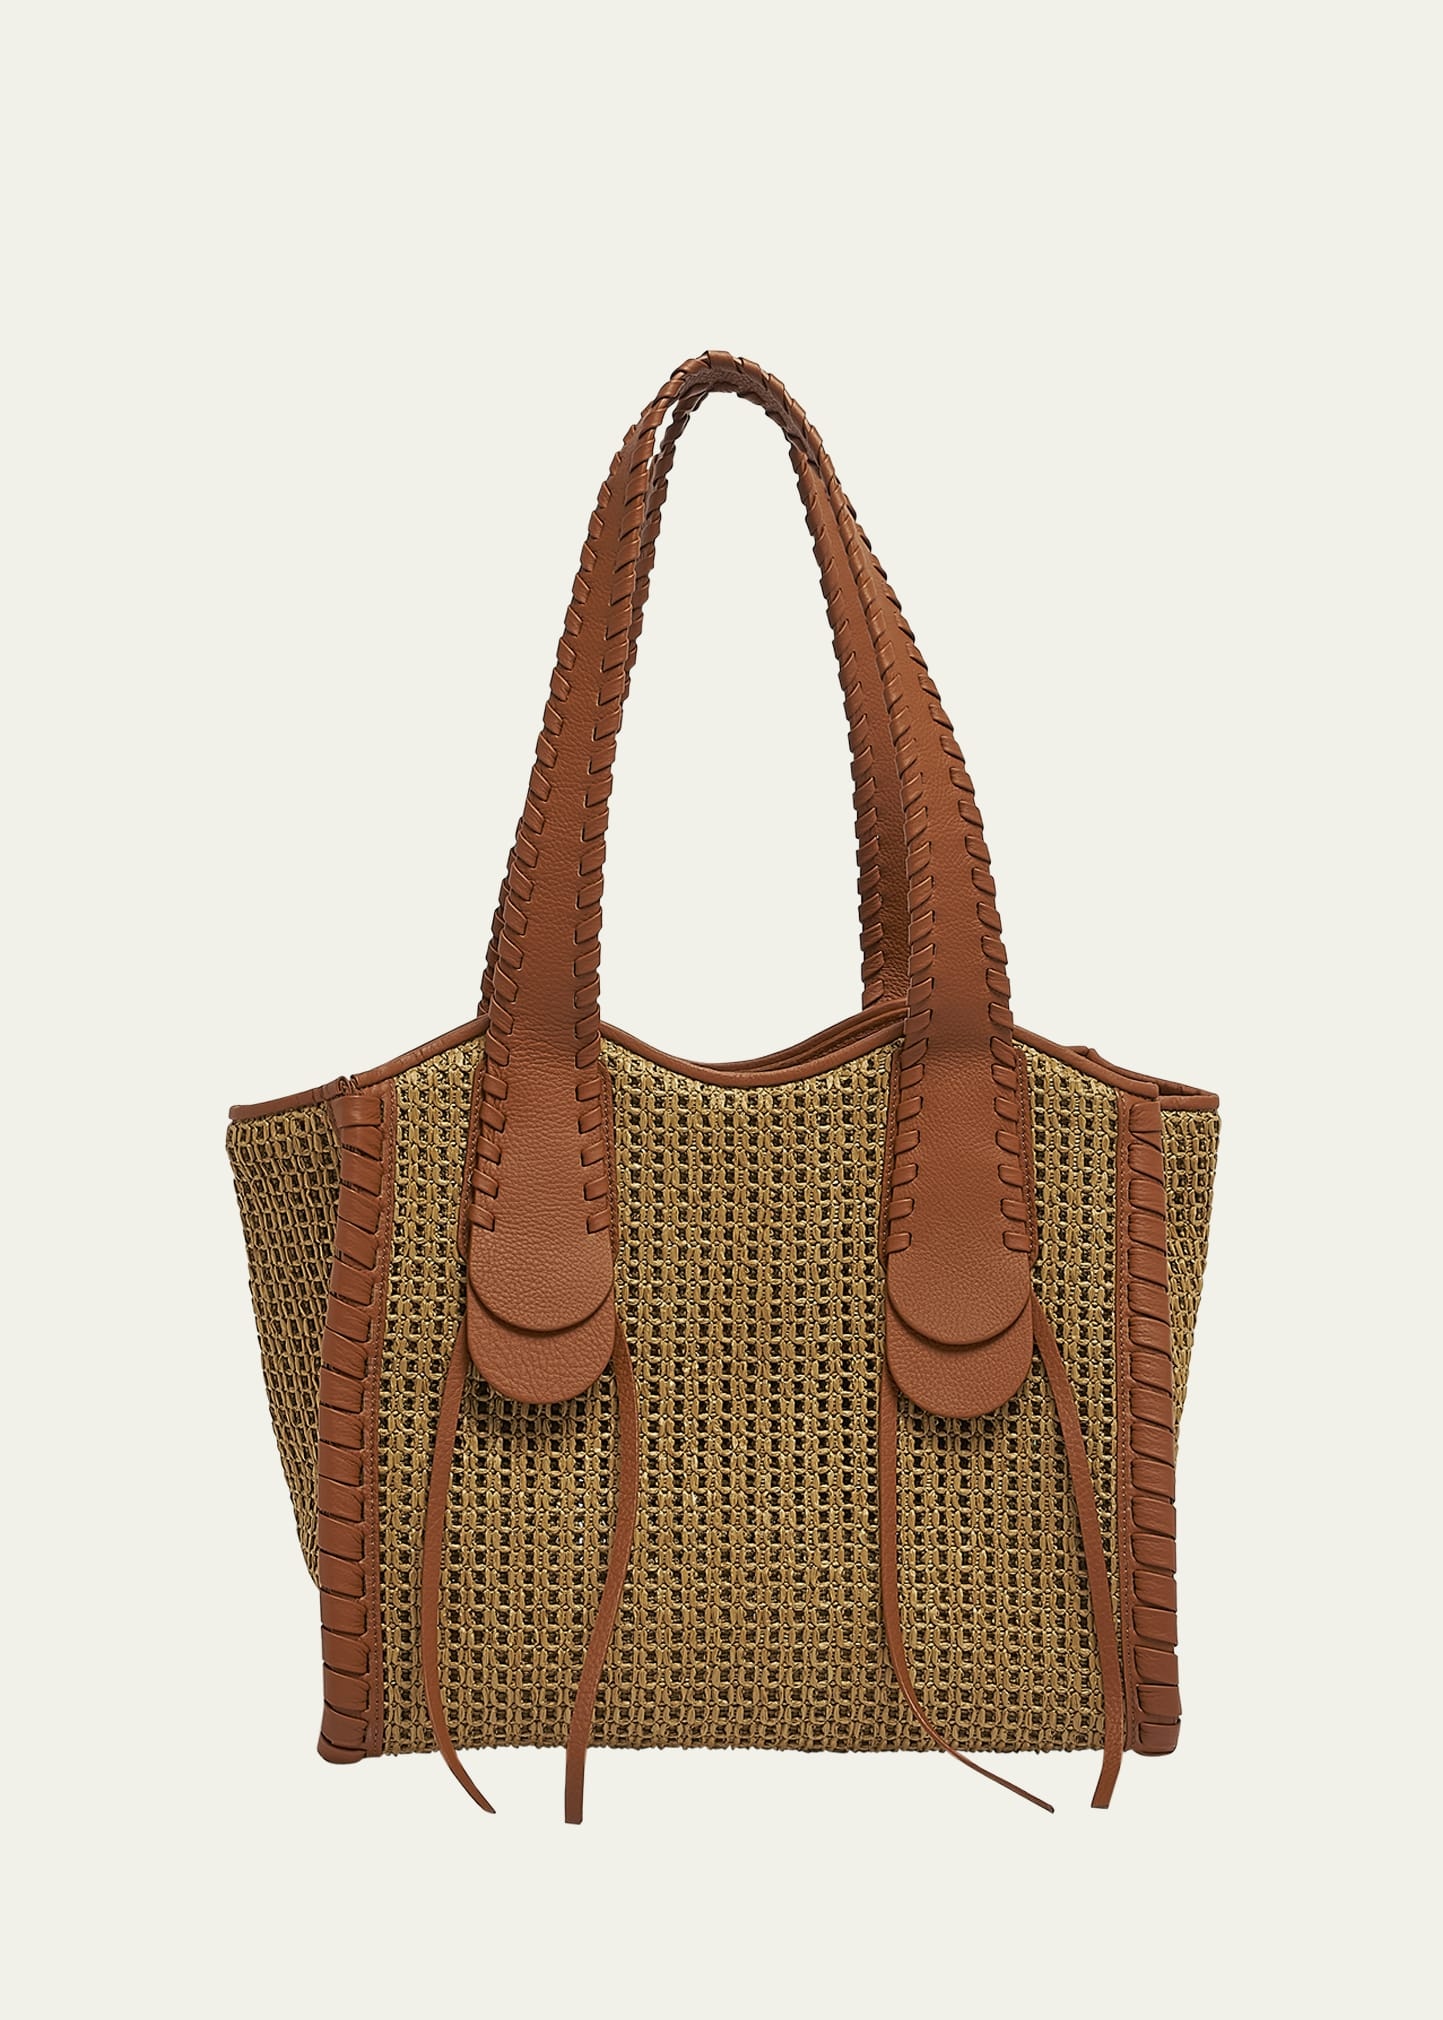 Monty Tote Bag in Raffia and Calfskin Leather - 1